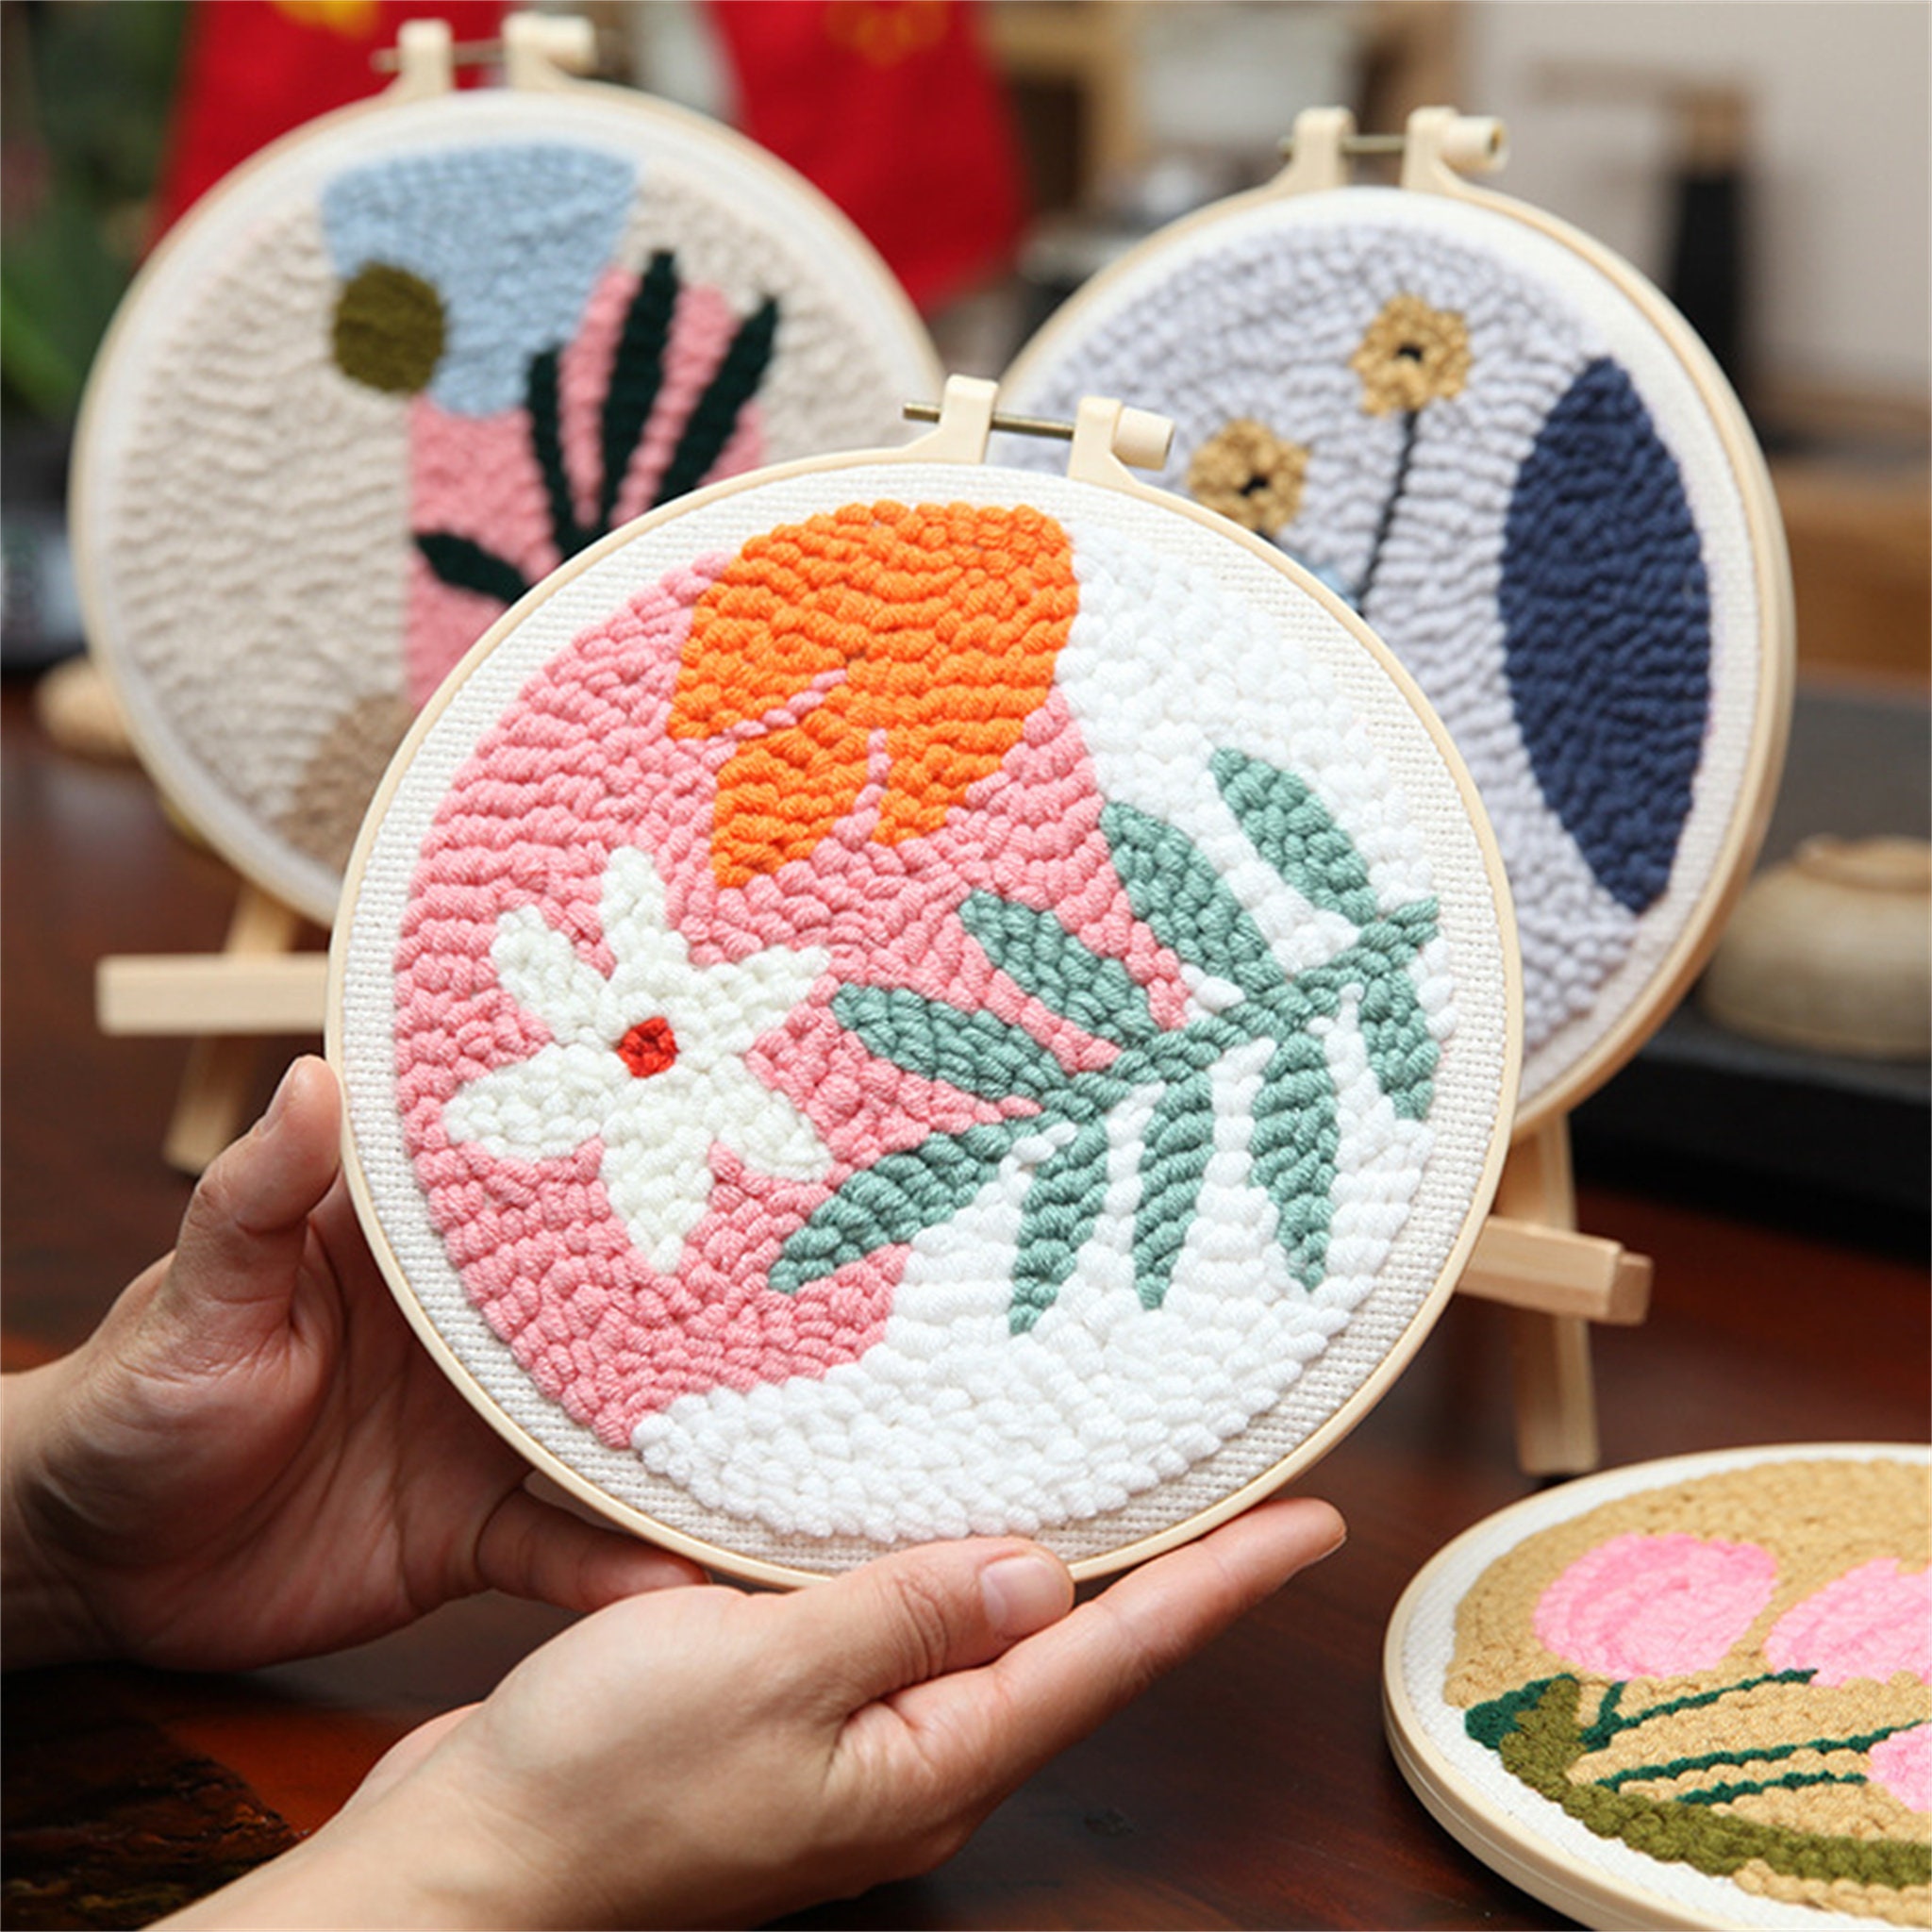 Scenery Pattern Punch Needle Embroidery Starter Set With Yarn DIY Craft Kit  Magic Tufting Embroidery Kit